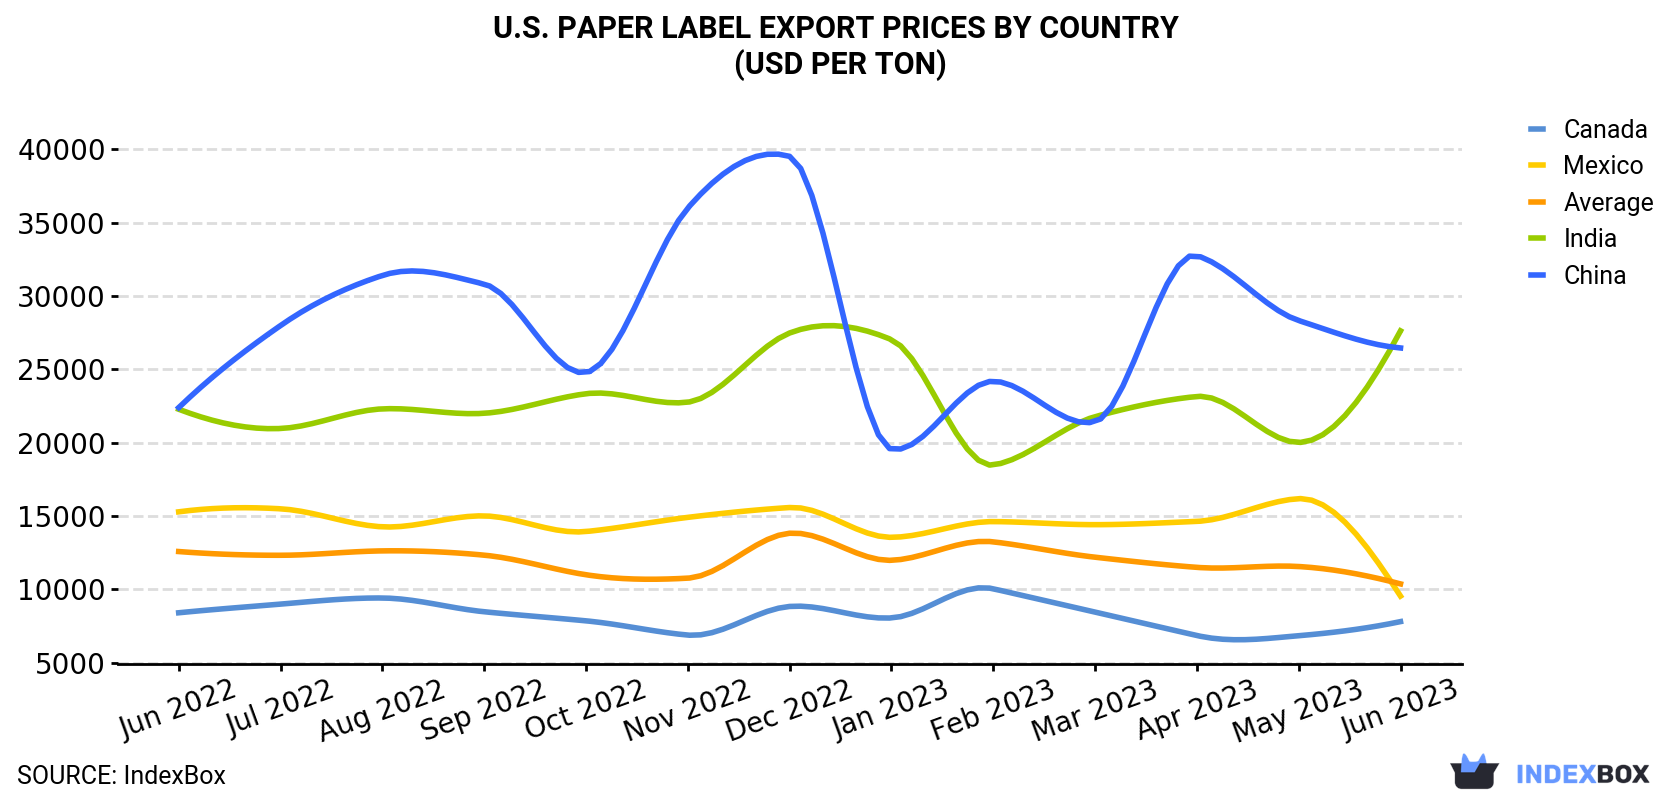 U.S. Paper Label Export Prices By Country (USD Per Ton)